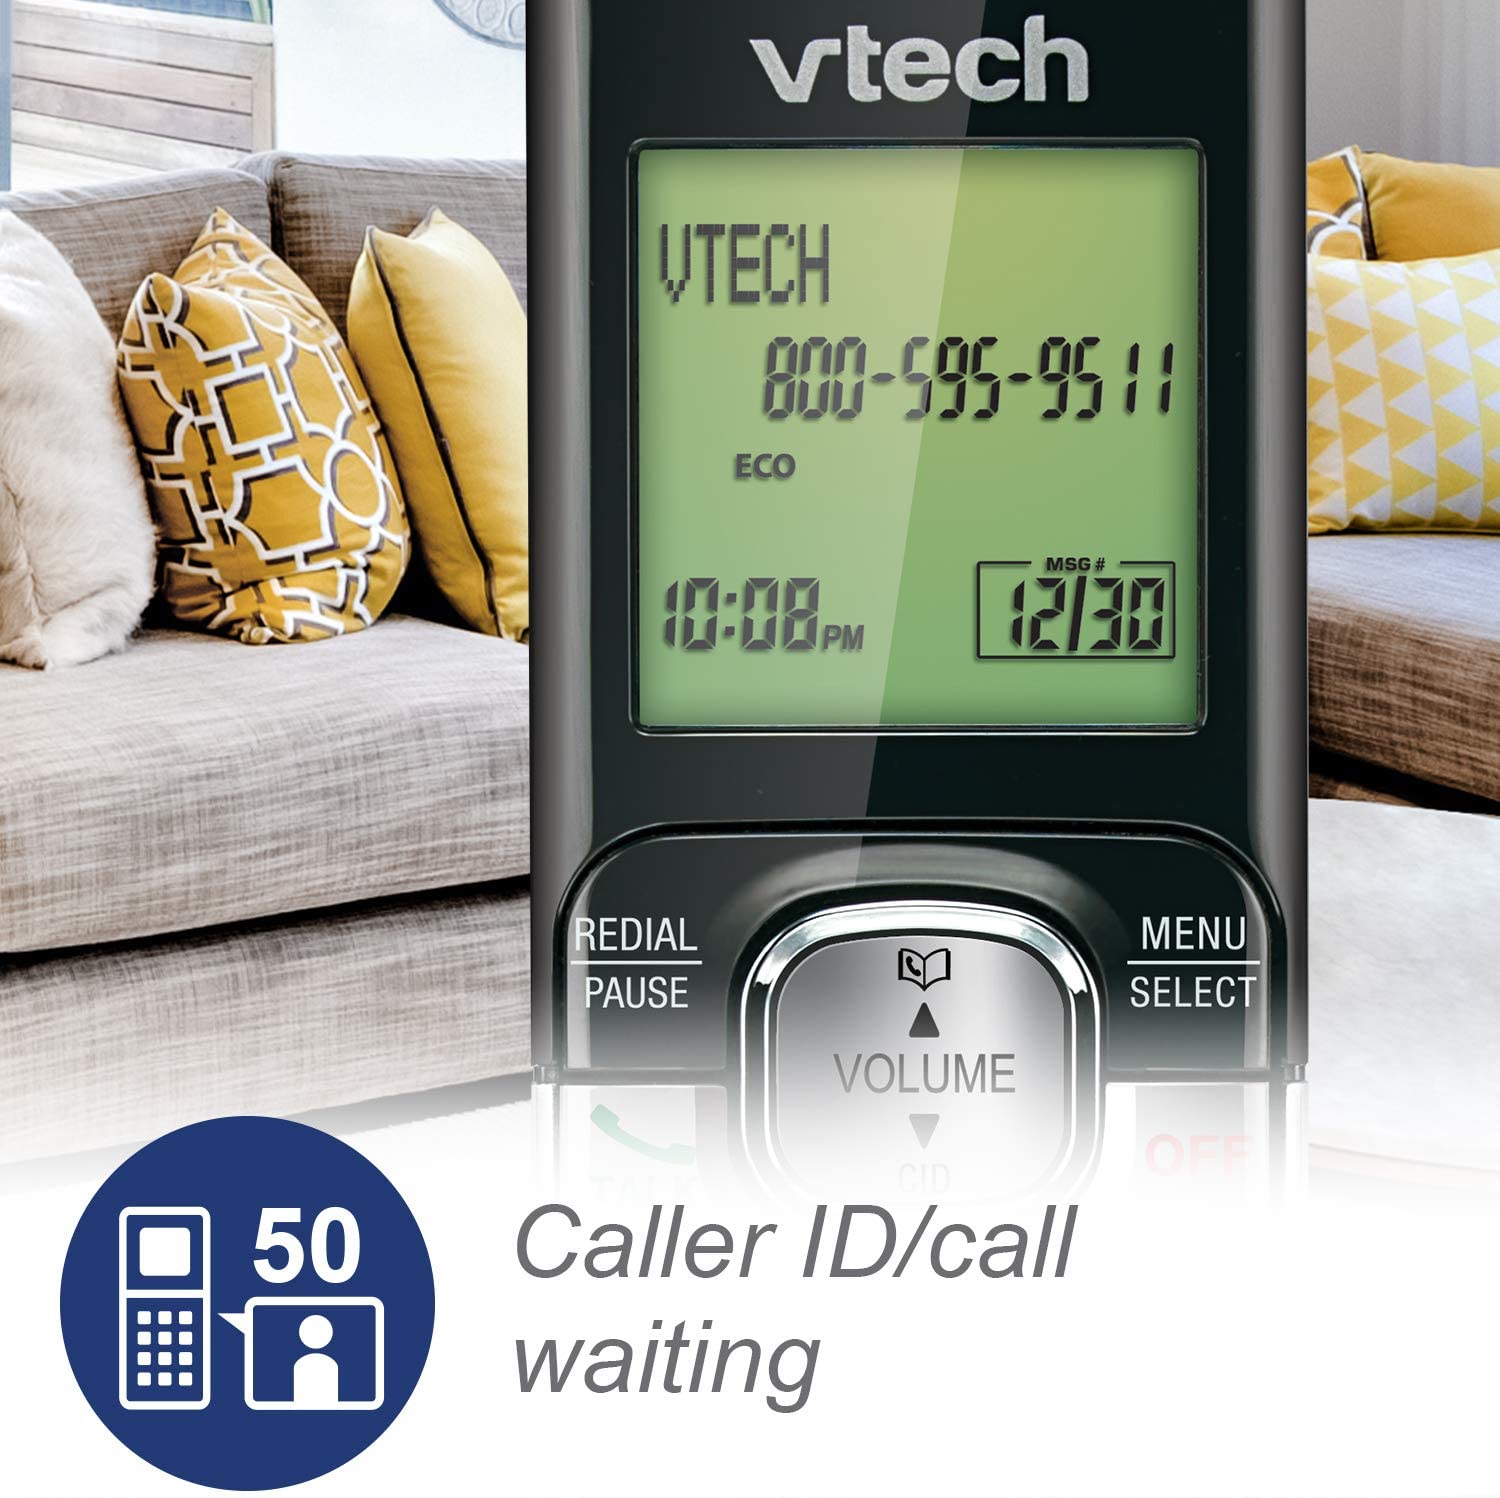 VTech CS6529-3 3-Handset DECT 6.0 Expandable Cordless Phone, Silver - with Answering System and Caller ID/Call Waiting